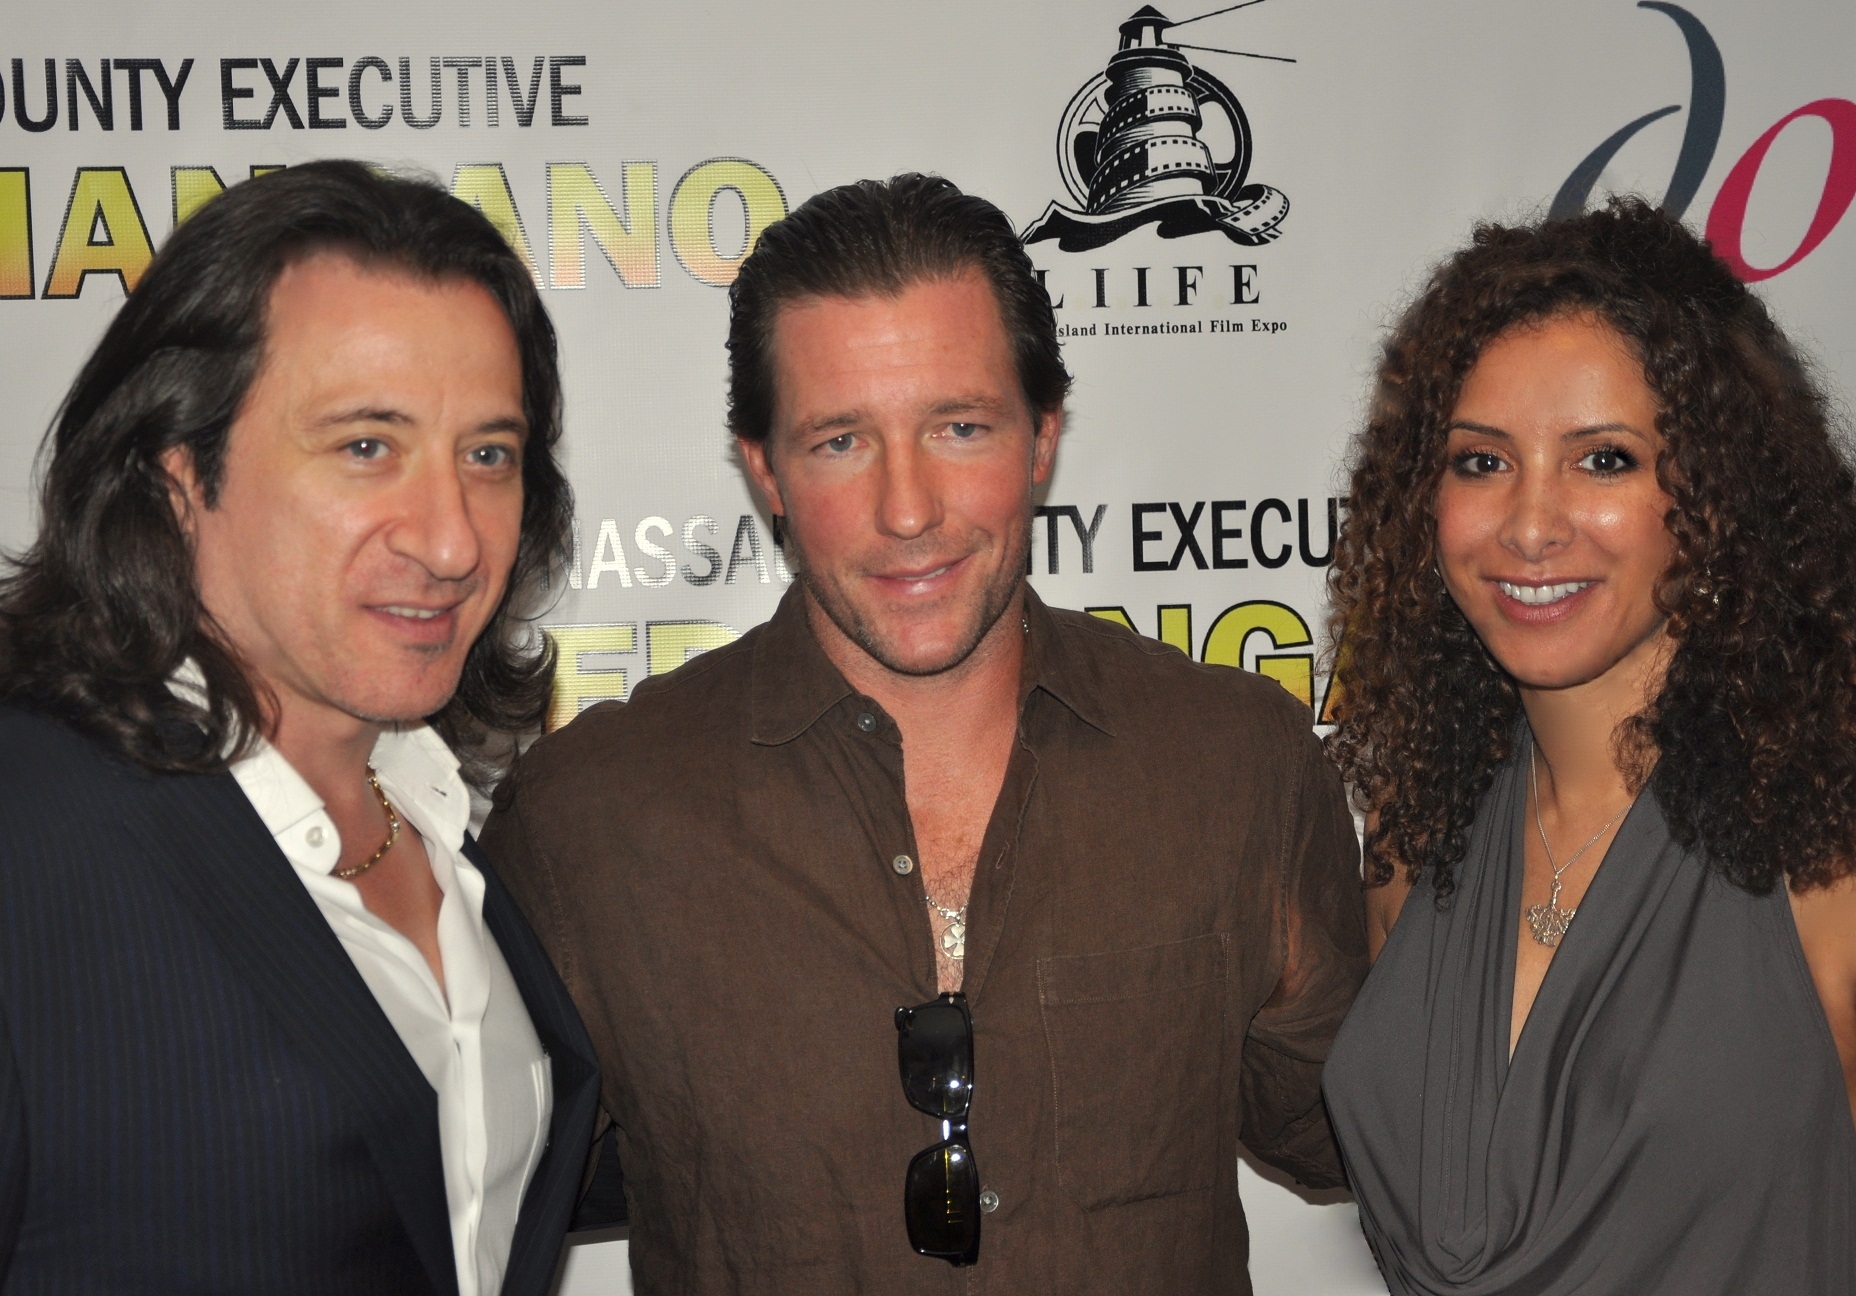 Director Federico Castelluccio wins award for Best Director, Best Short, actress, producer Yvonne Maria Schaefer and Ed Burns who wins Creative Achievment Award at Long Island International Film Expo in Bellmore